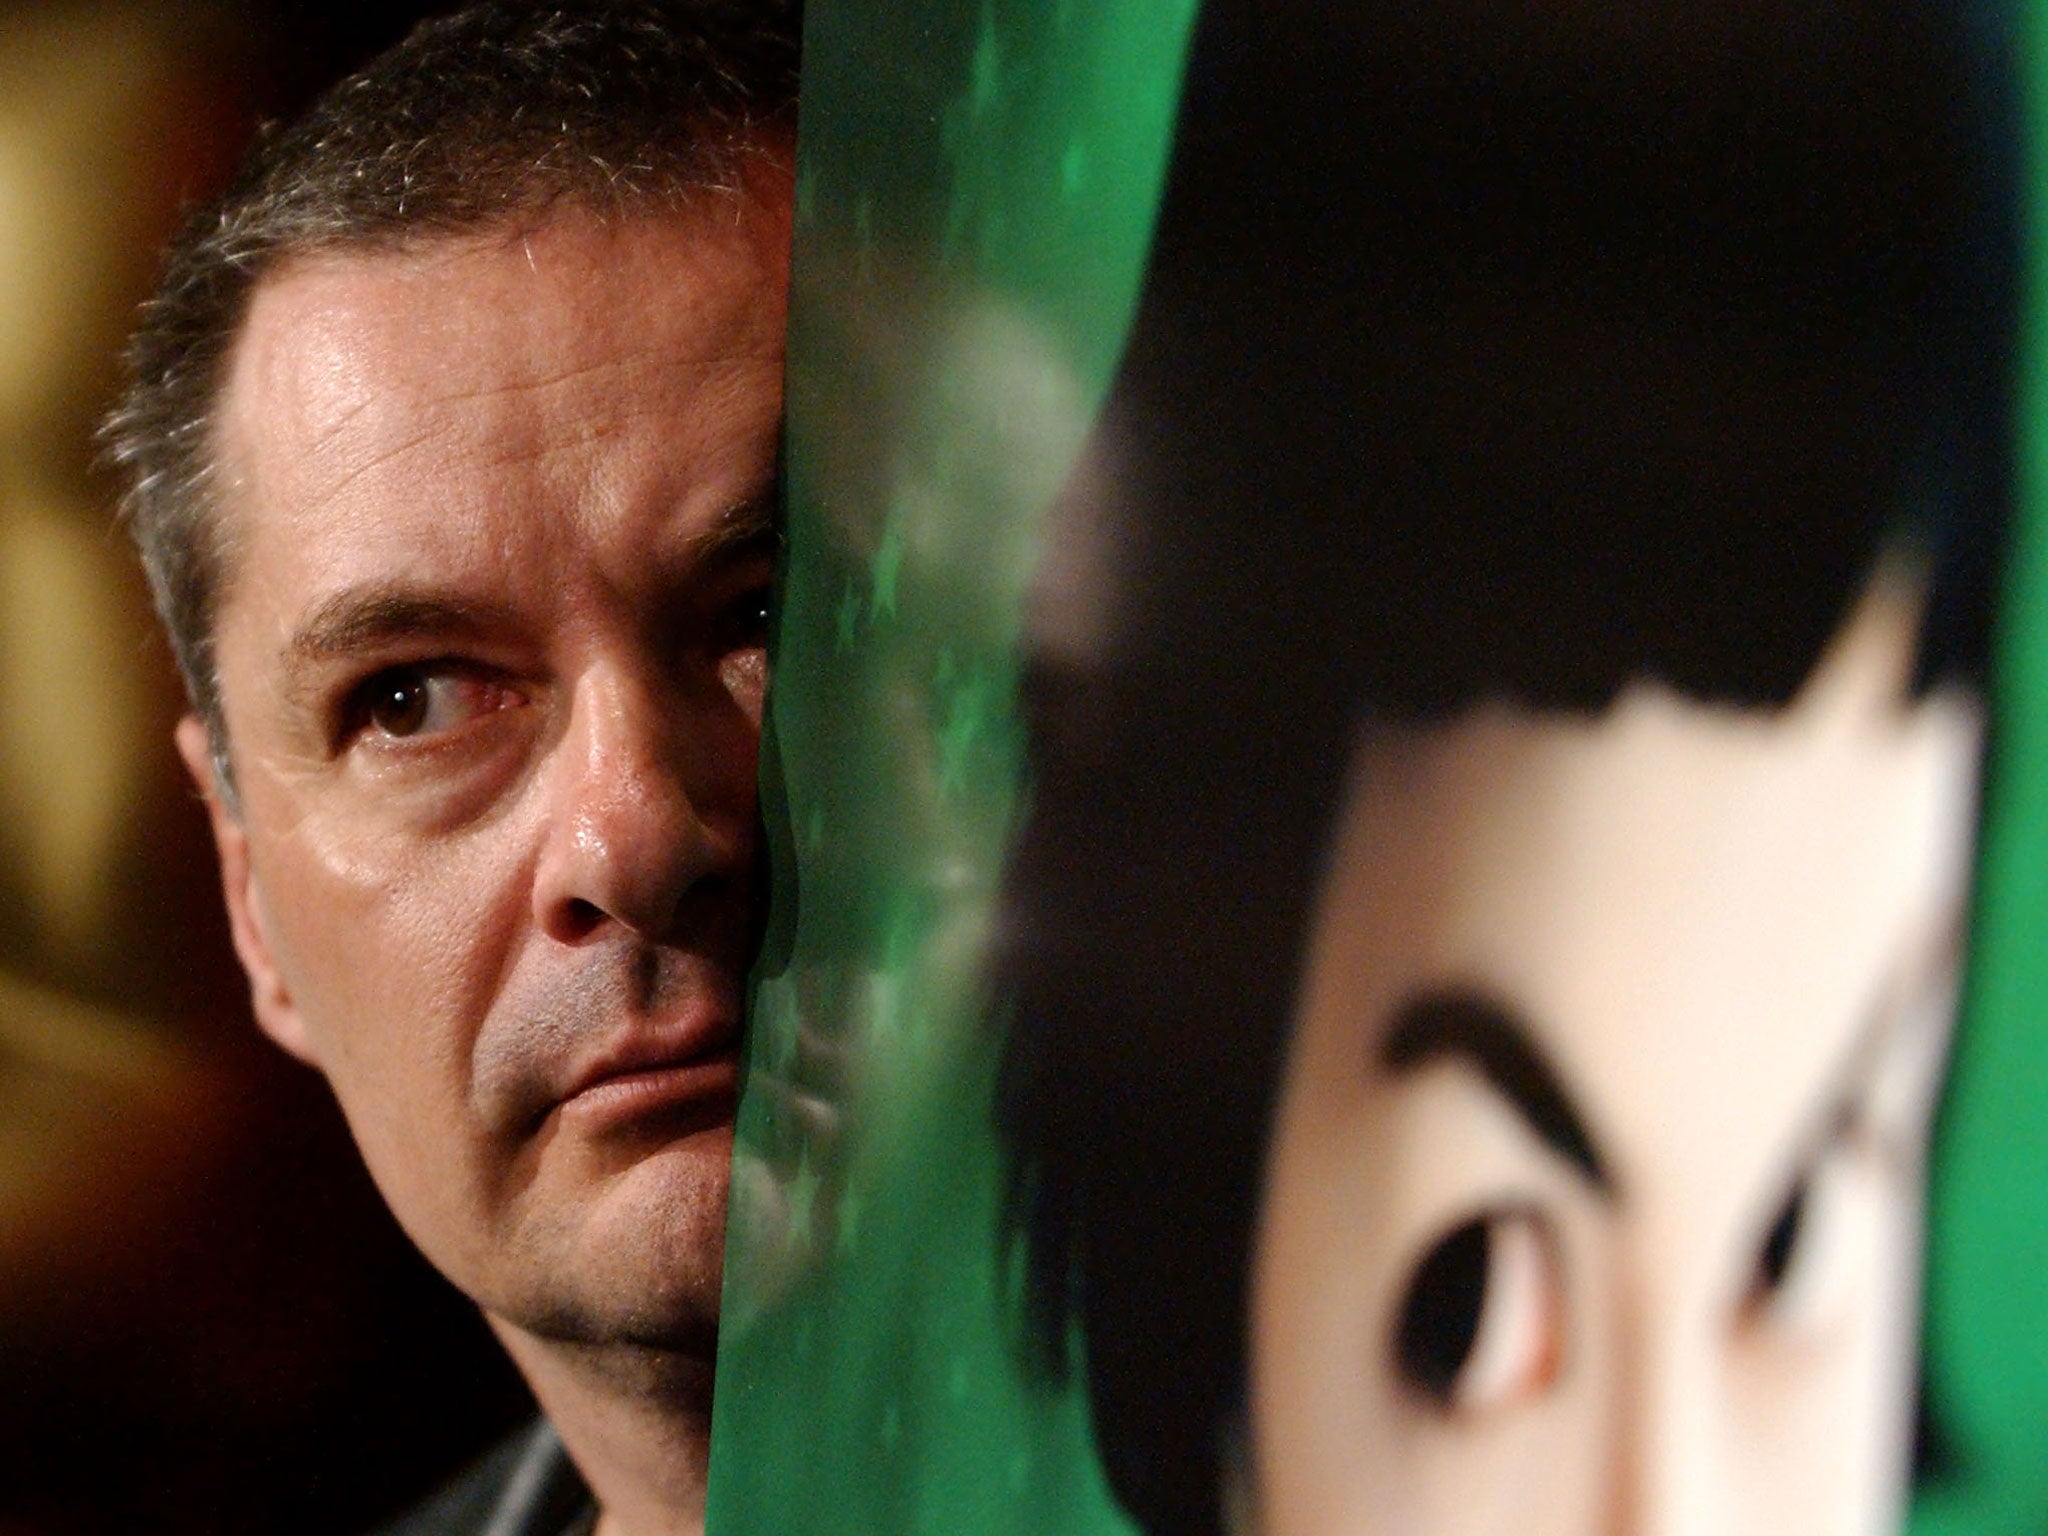 French Director Jean-Pierre Jeunet peers at the media from behind a poster of his film 'Amelie', 2002